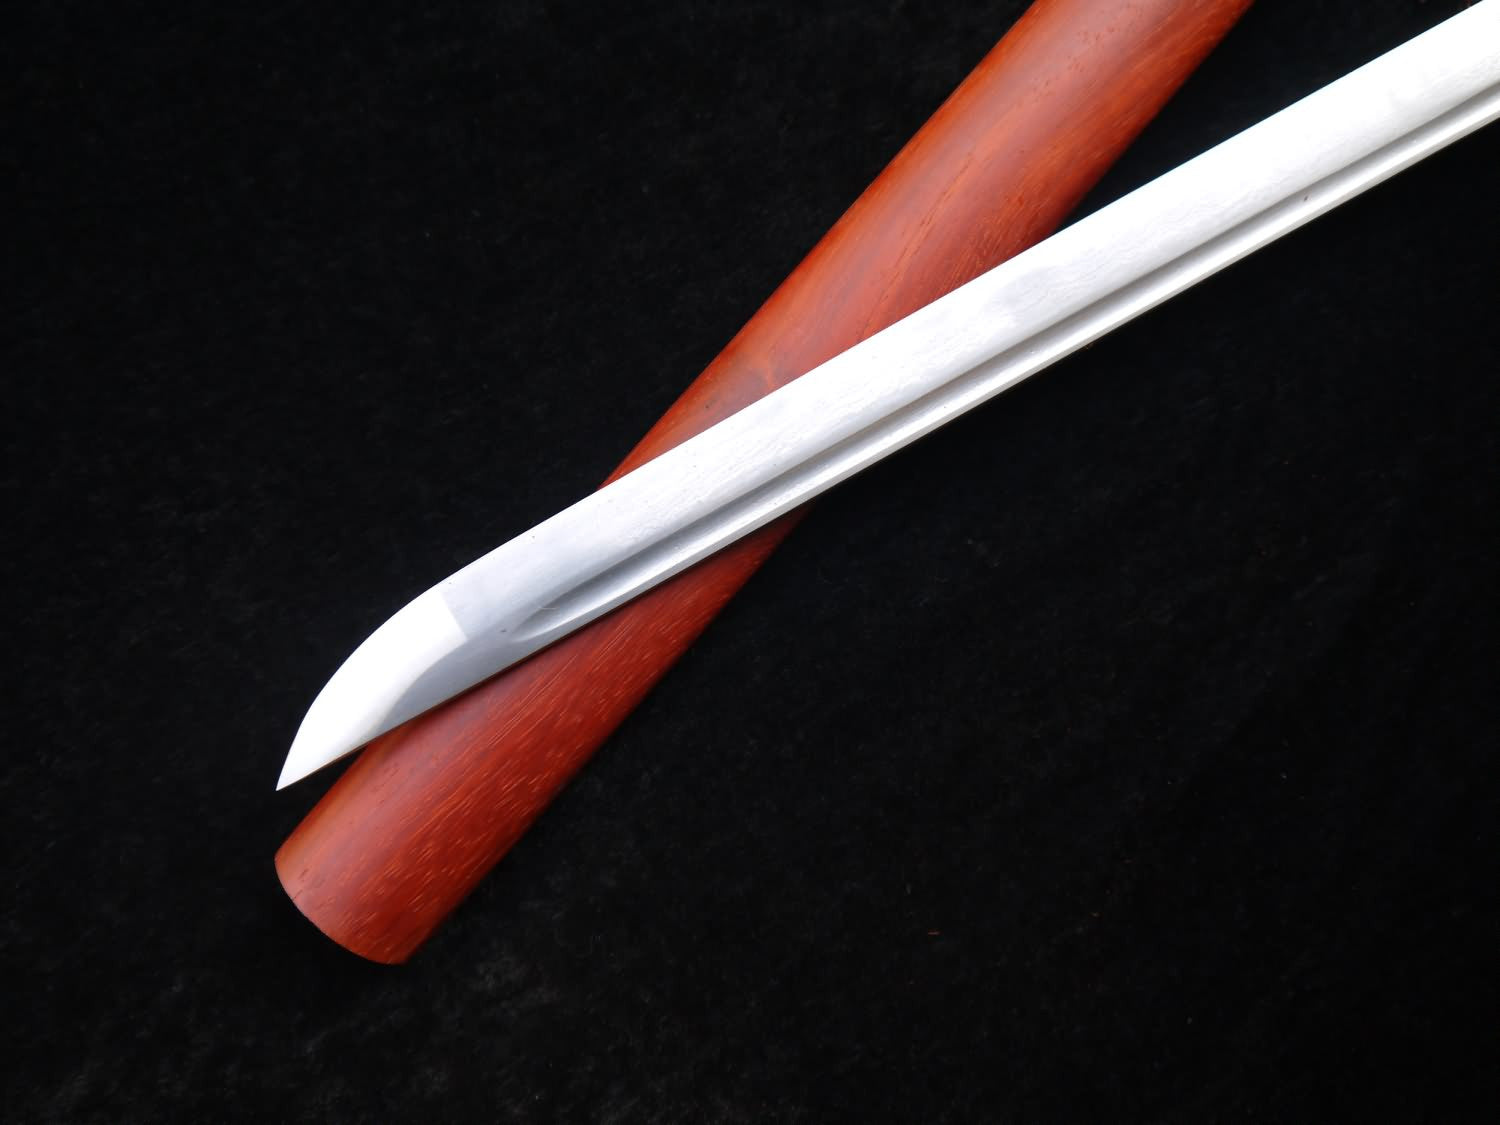 Tang sword,Folded steel,Redwood scabbard,Full tang,Length 39" - Chinese sword shop